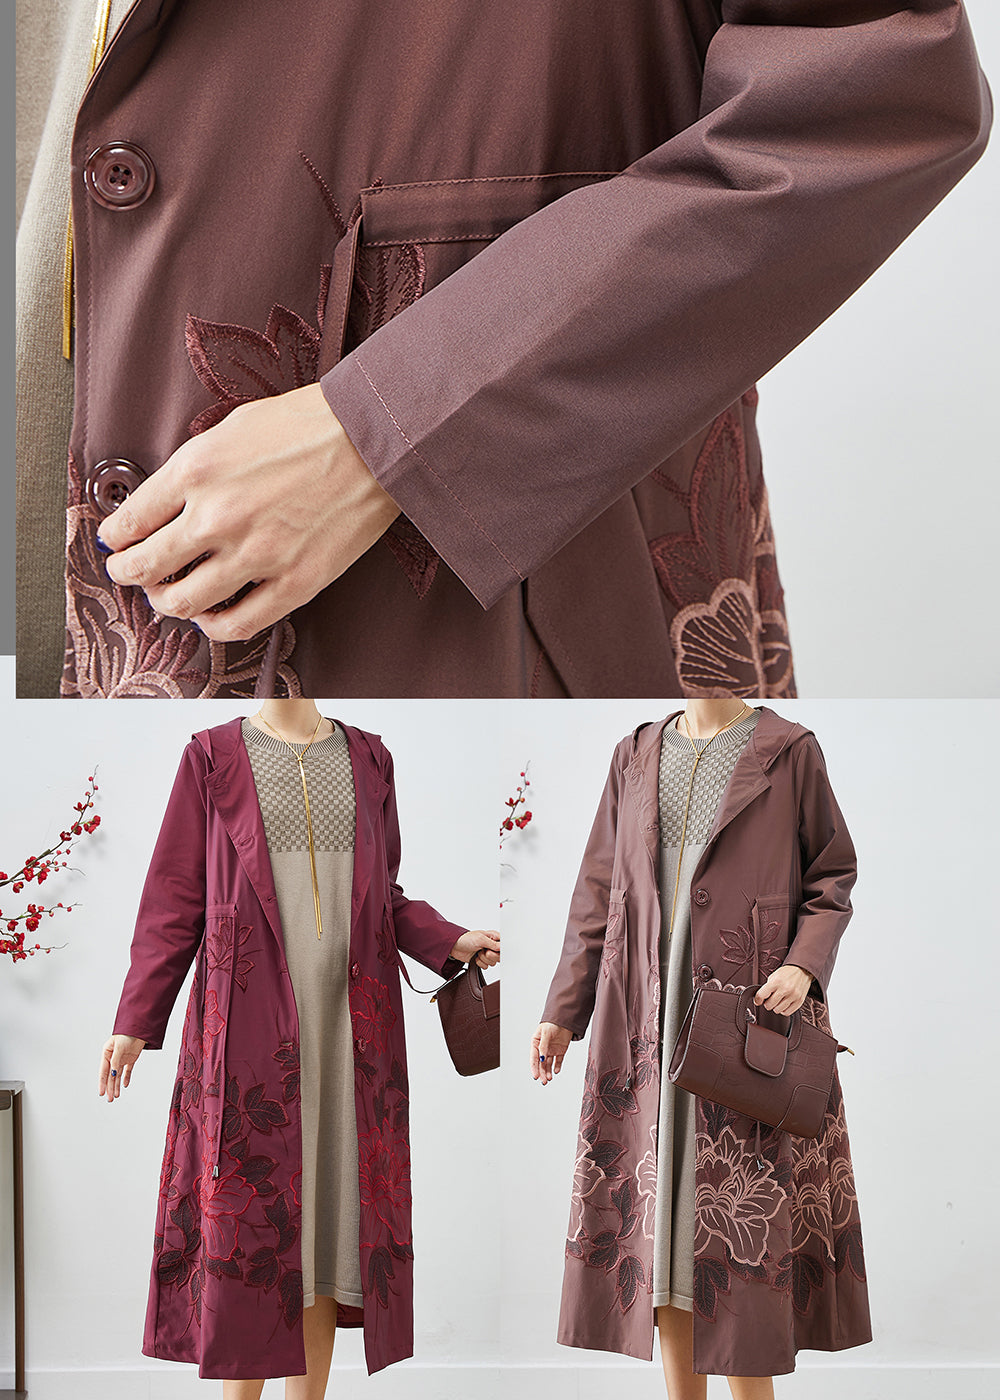 French Mulberry Embroideried Drawstring Spandex Coats Fall